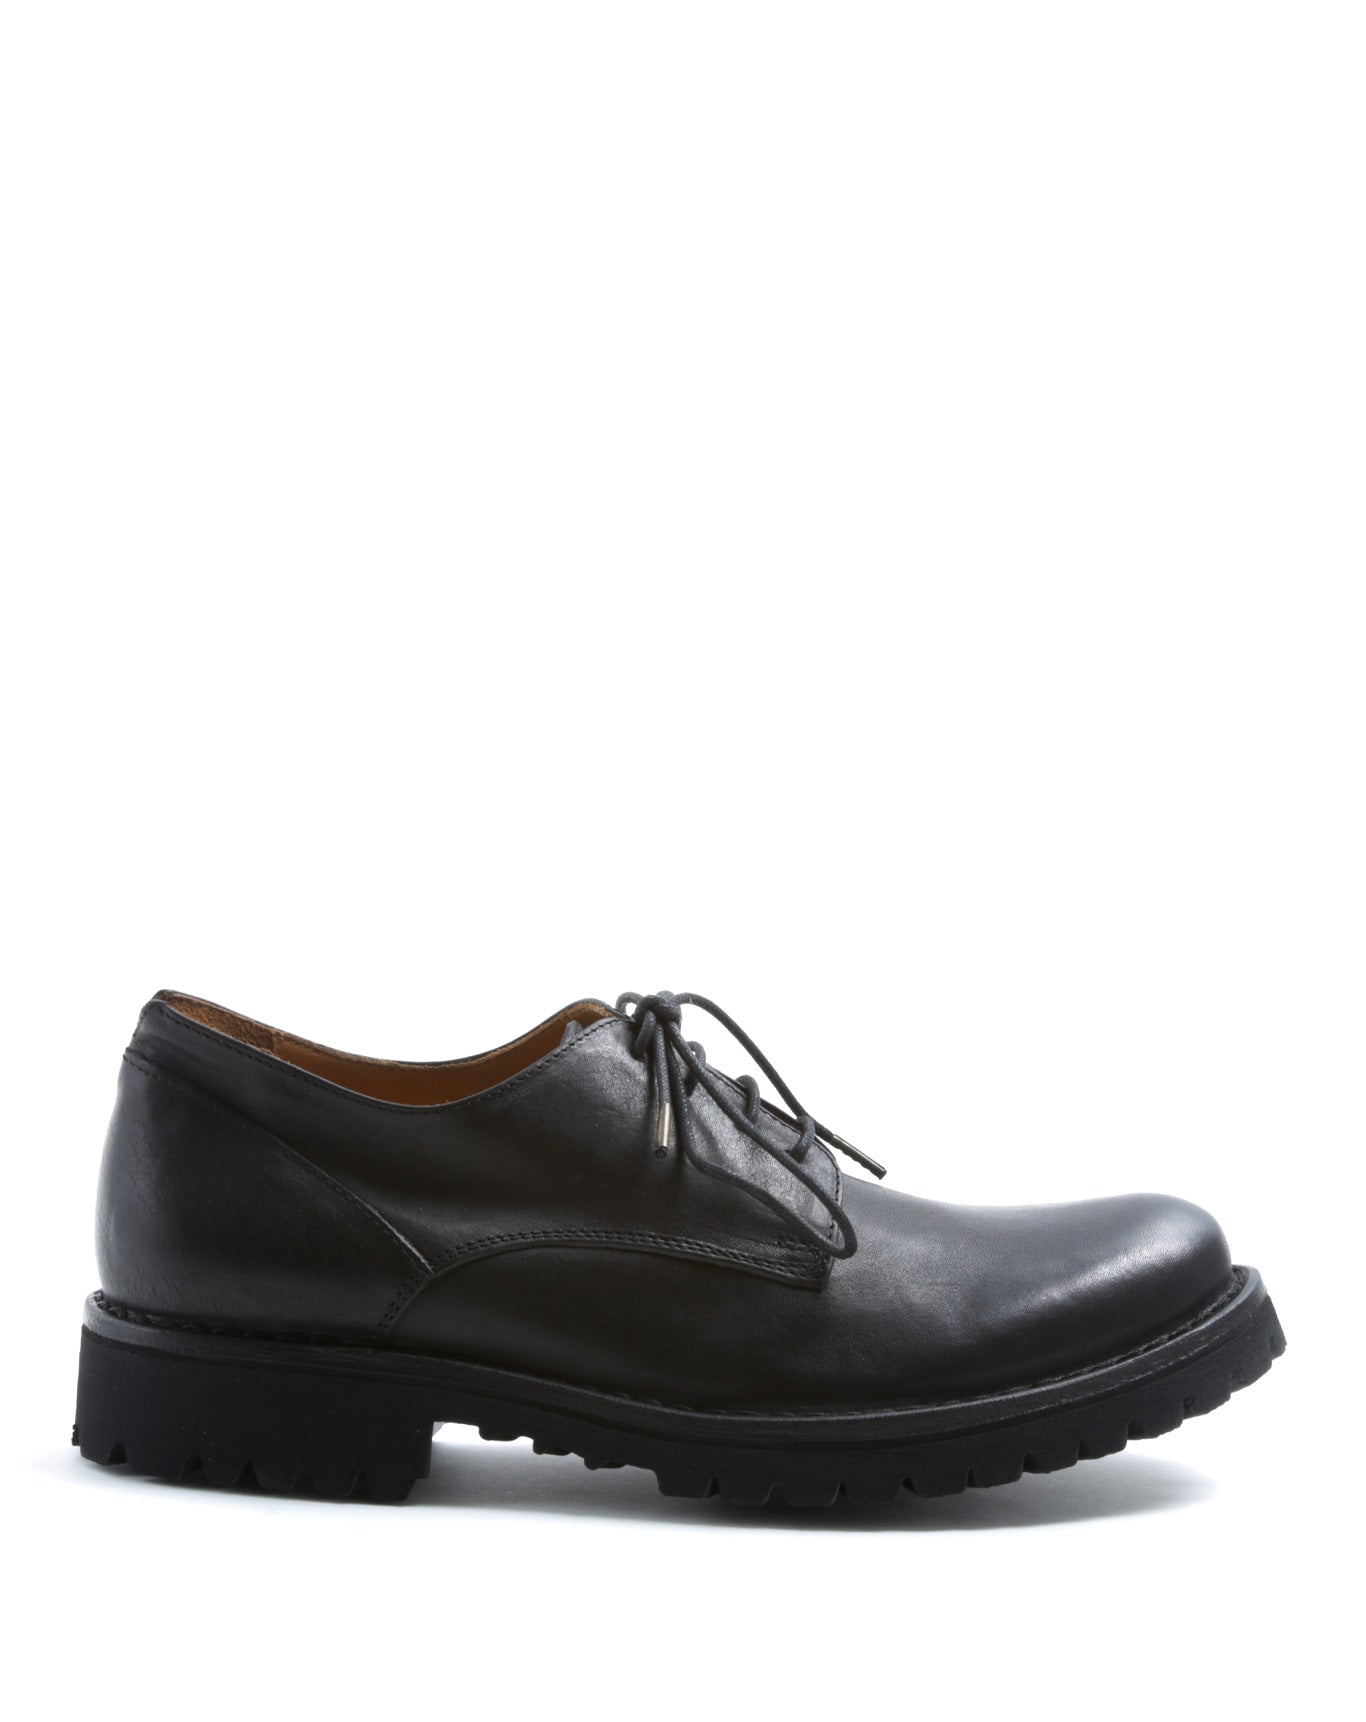 FIORENTINI + BAKER, ETERNITY MASSIVE M-706, This unisex derby shoe will be a timeless asset. British design. Handcrafted with natural leather by skilled artisans. Made in Italy. Made to last.